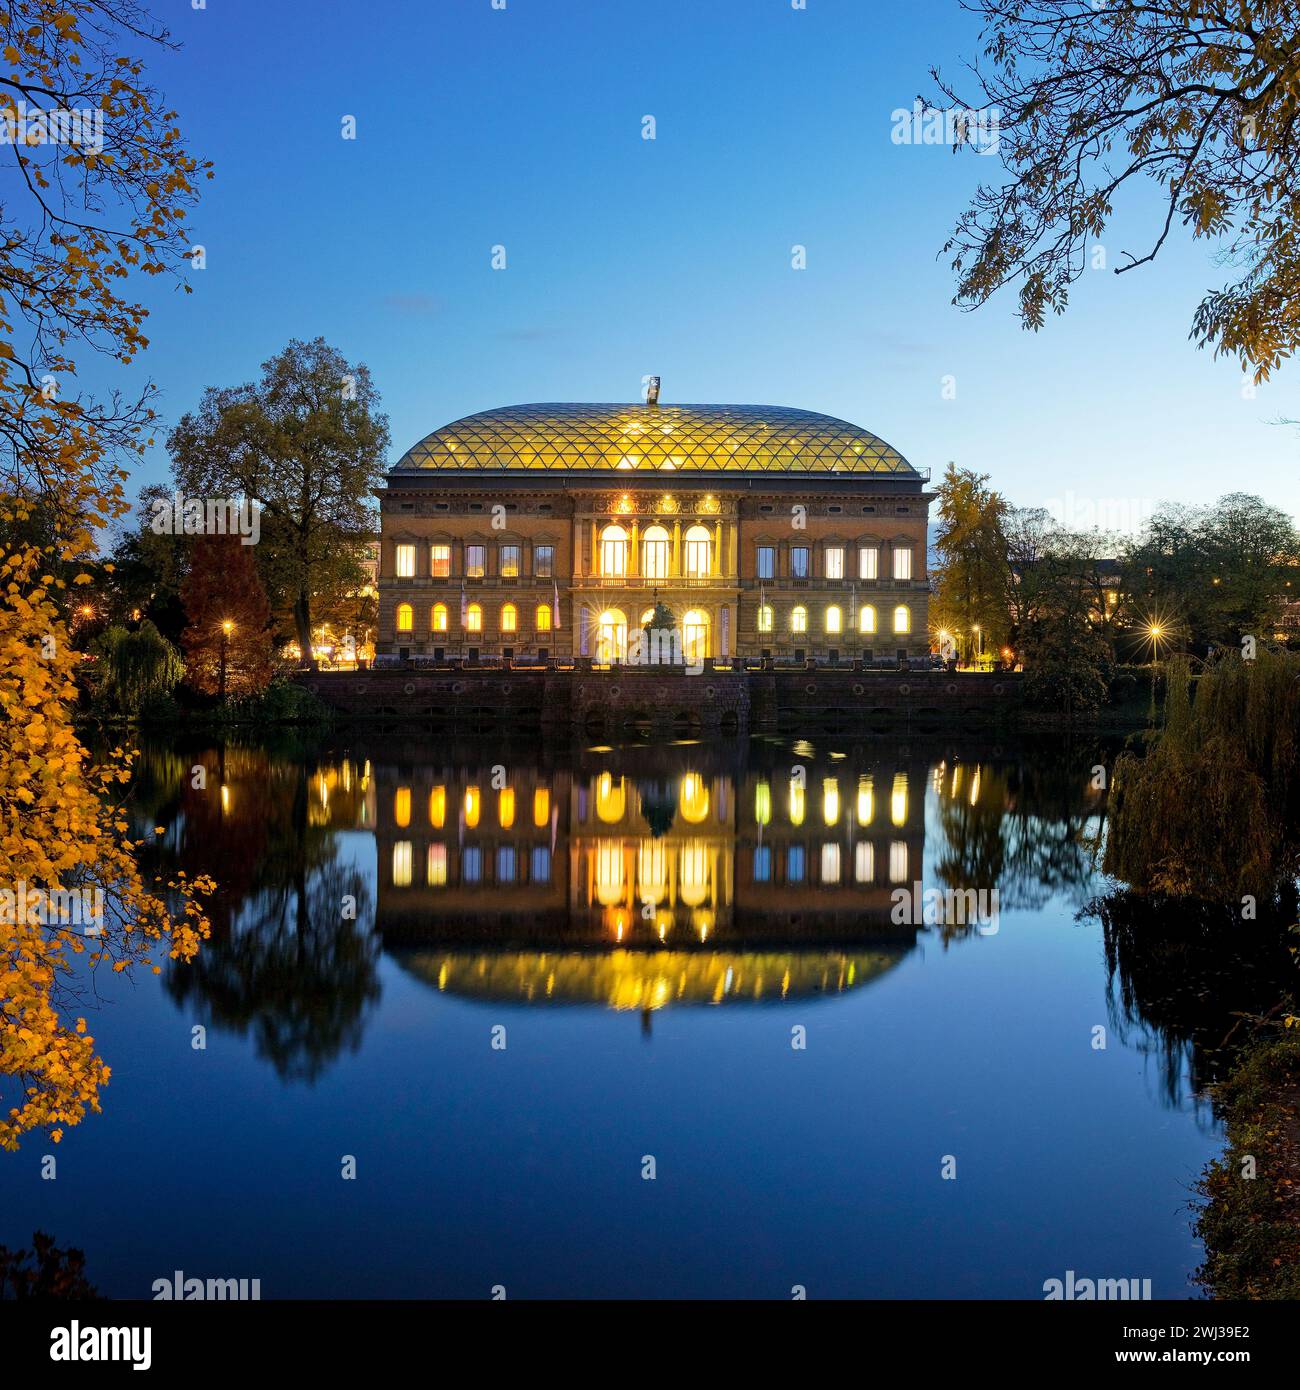 Staendehaus K21 with the Kaiserteich in autumn in the evening, Duesseldorf, Germany, Europe Stock Photo